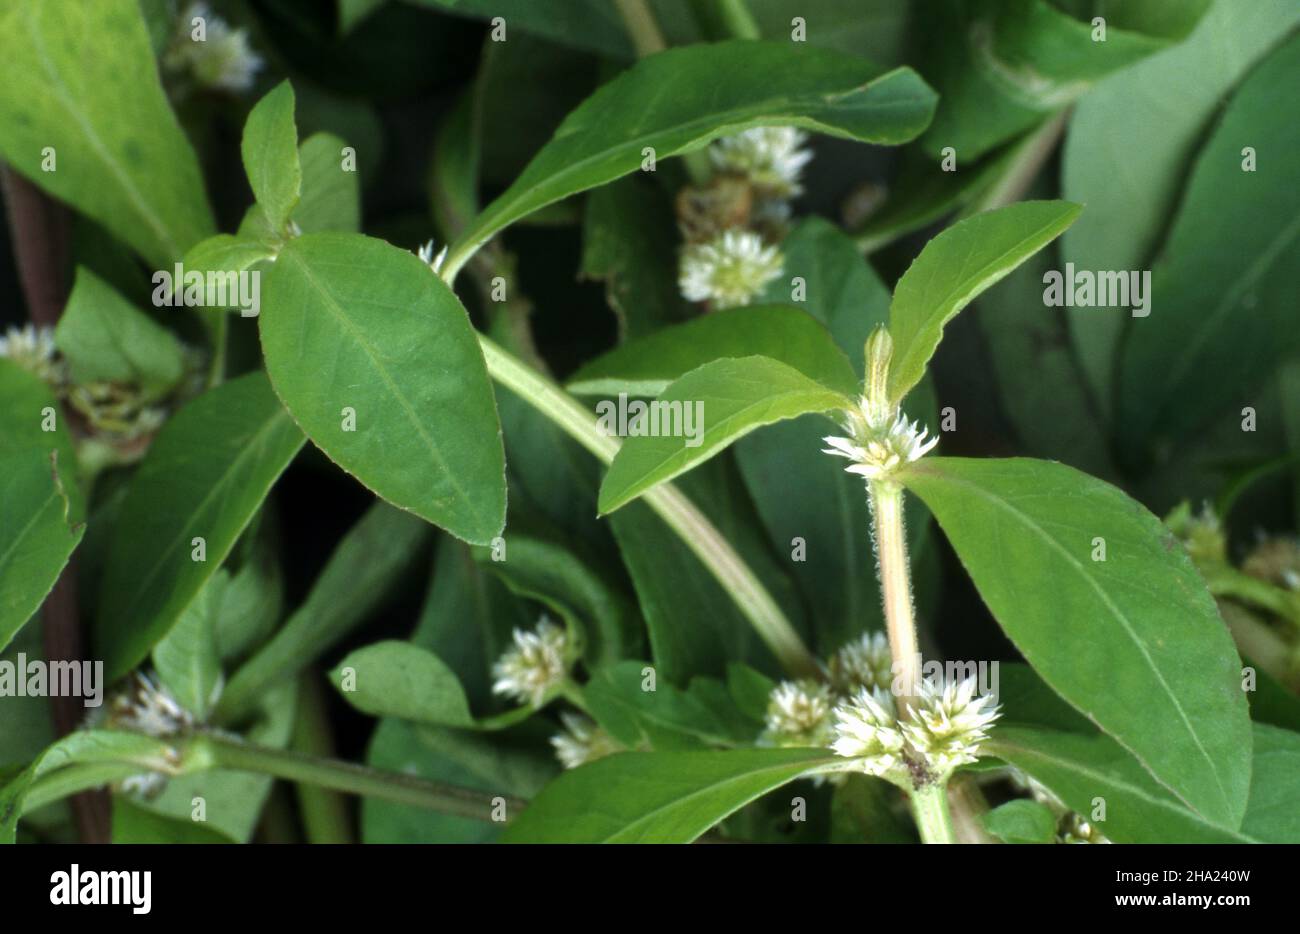 Alternanthera sessilis is an aquatic plant known by several common names, including Matikaduri, Mukunuwenna, sessile joyweed and dwarf copperleaf. Stock Photo